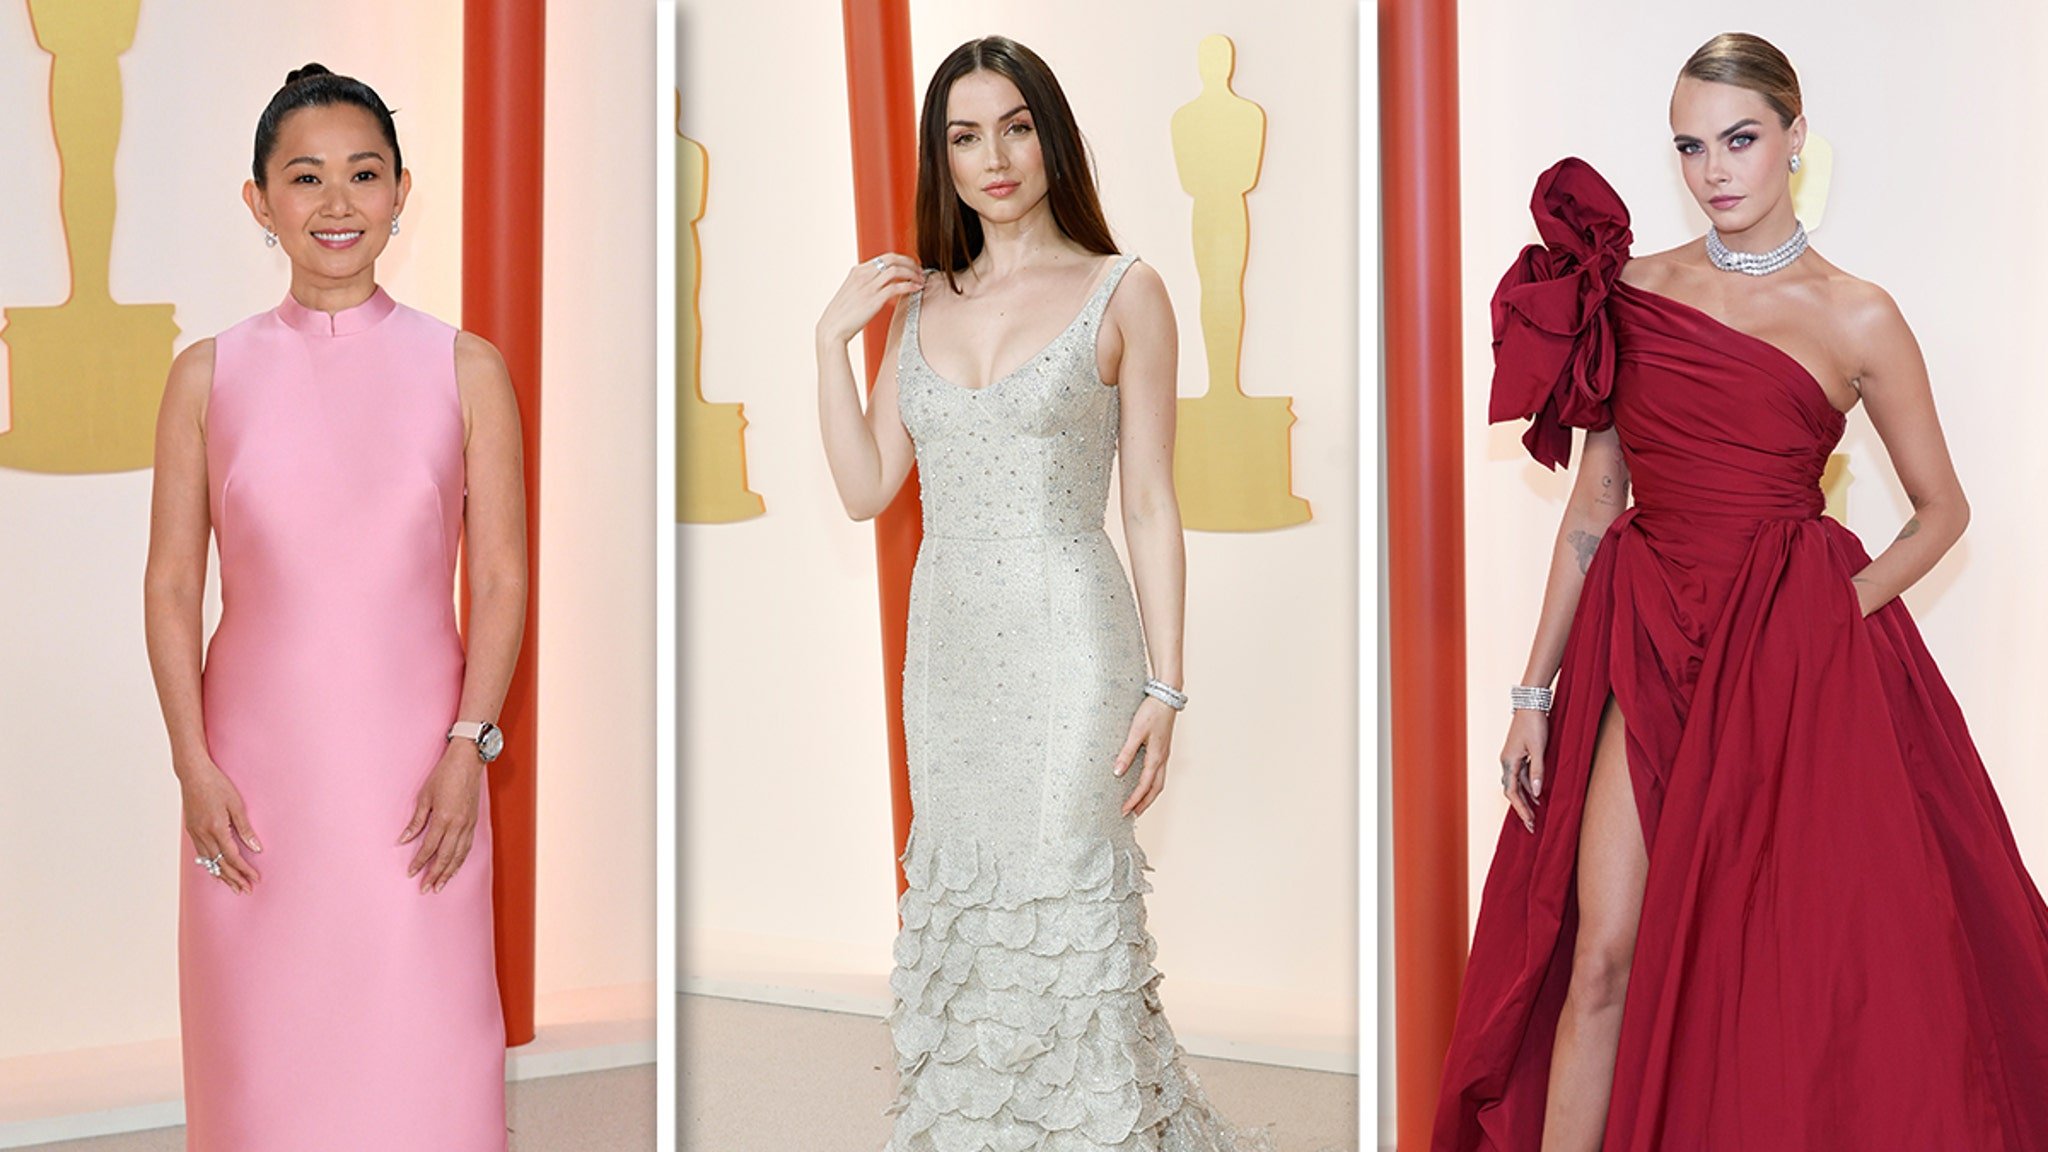 Oscars 2023 The Stars Have Arrived ... Classy, Traditional Looks Pre-Show